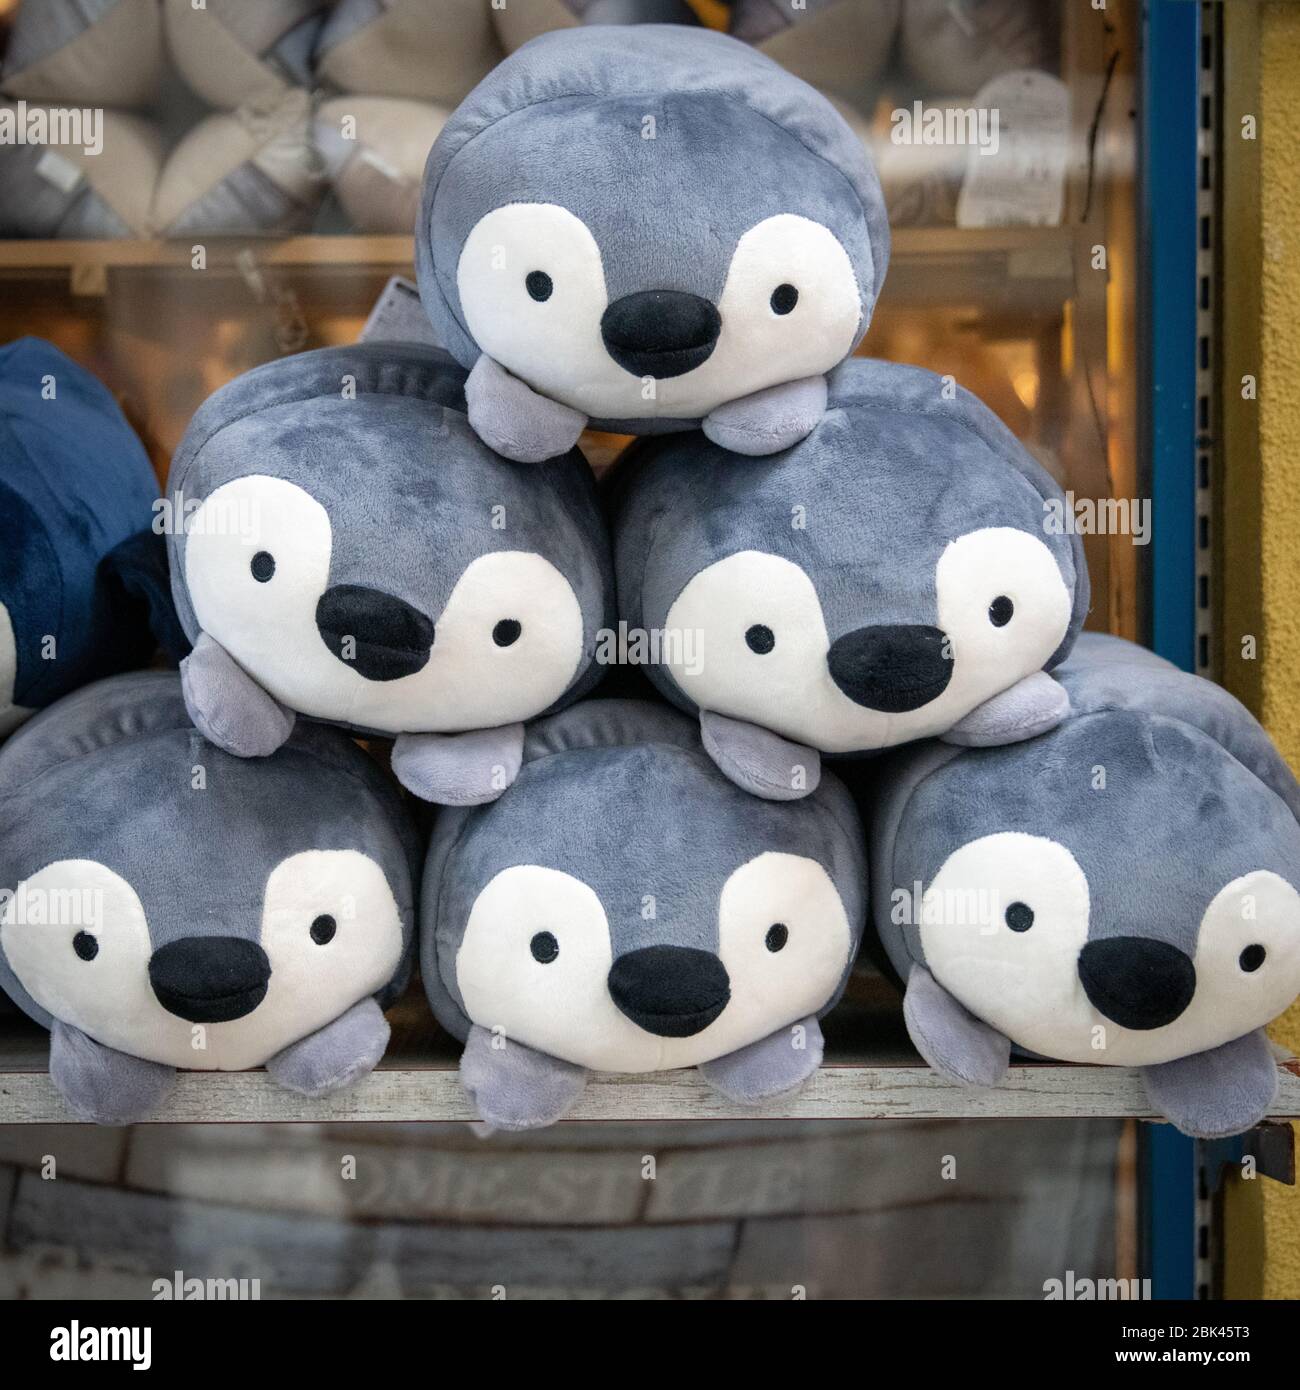 Display of 6 Cuddly Toys Stock Photo